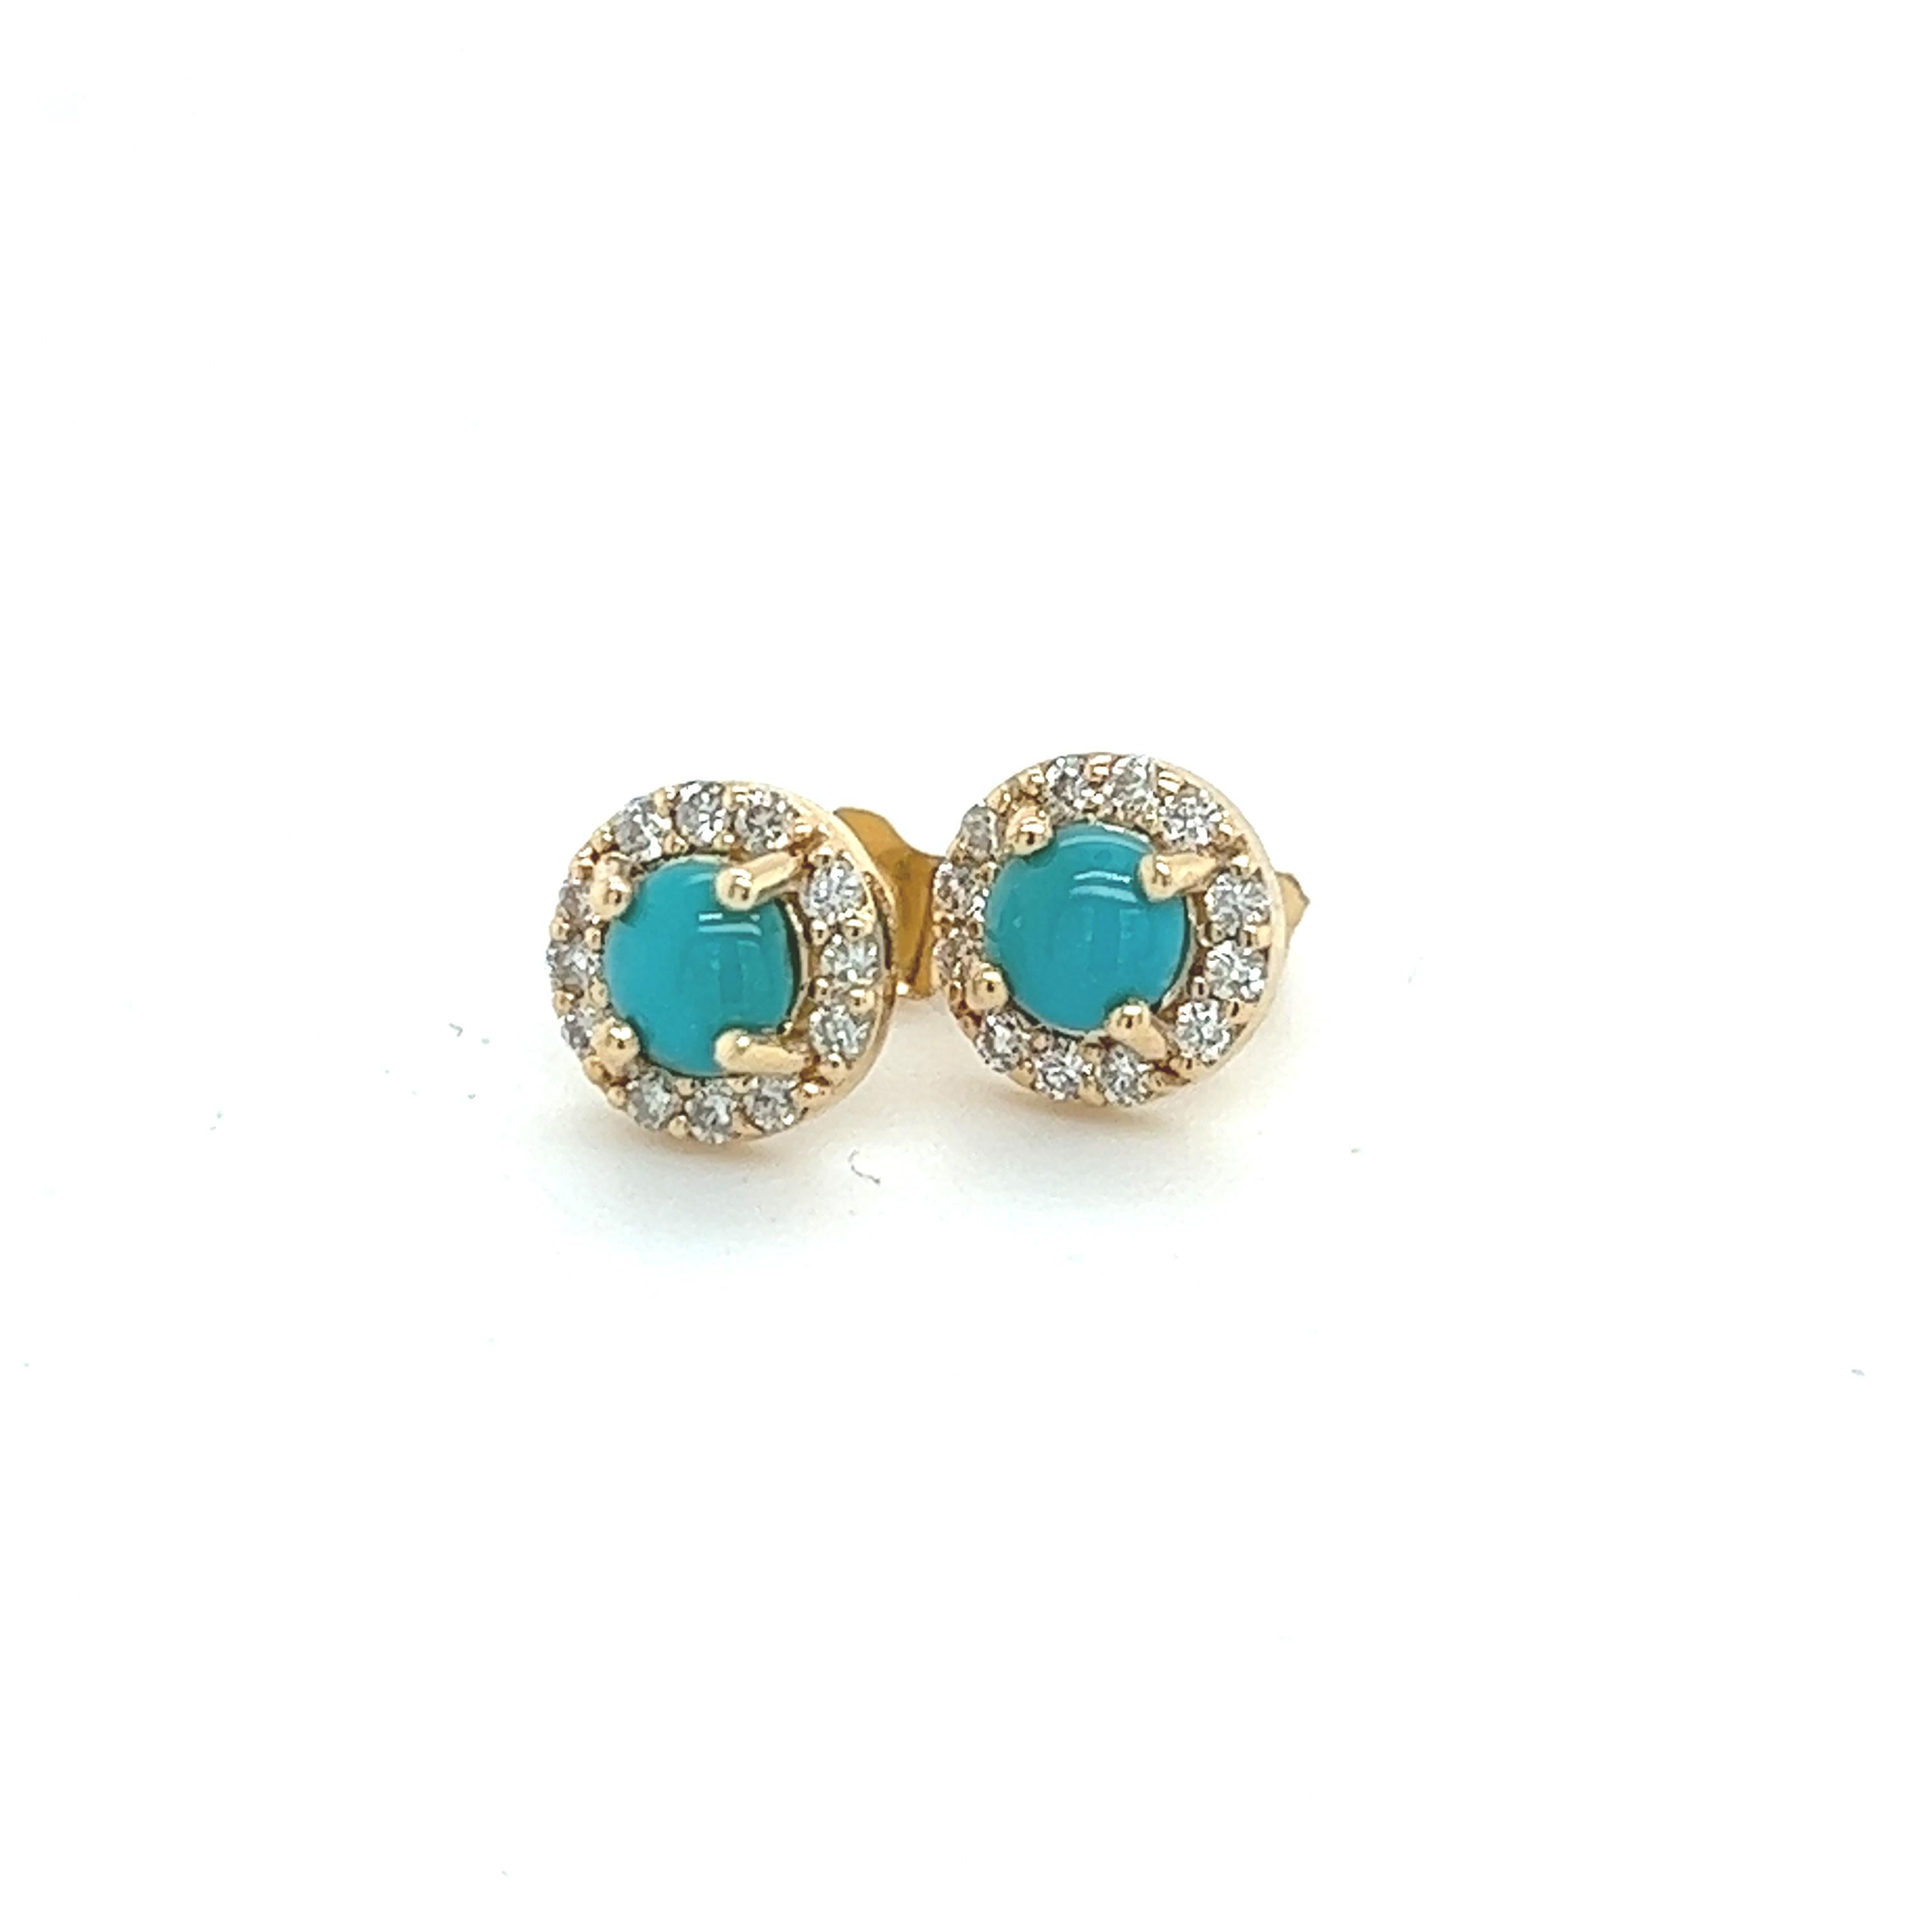 Natural Turquoise Diamond Stud Earrings 14k Yellow Gold 0.65 TCW Certified For Sale 2